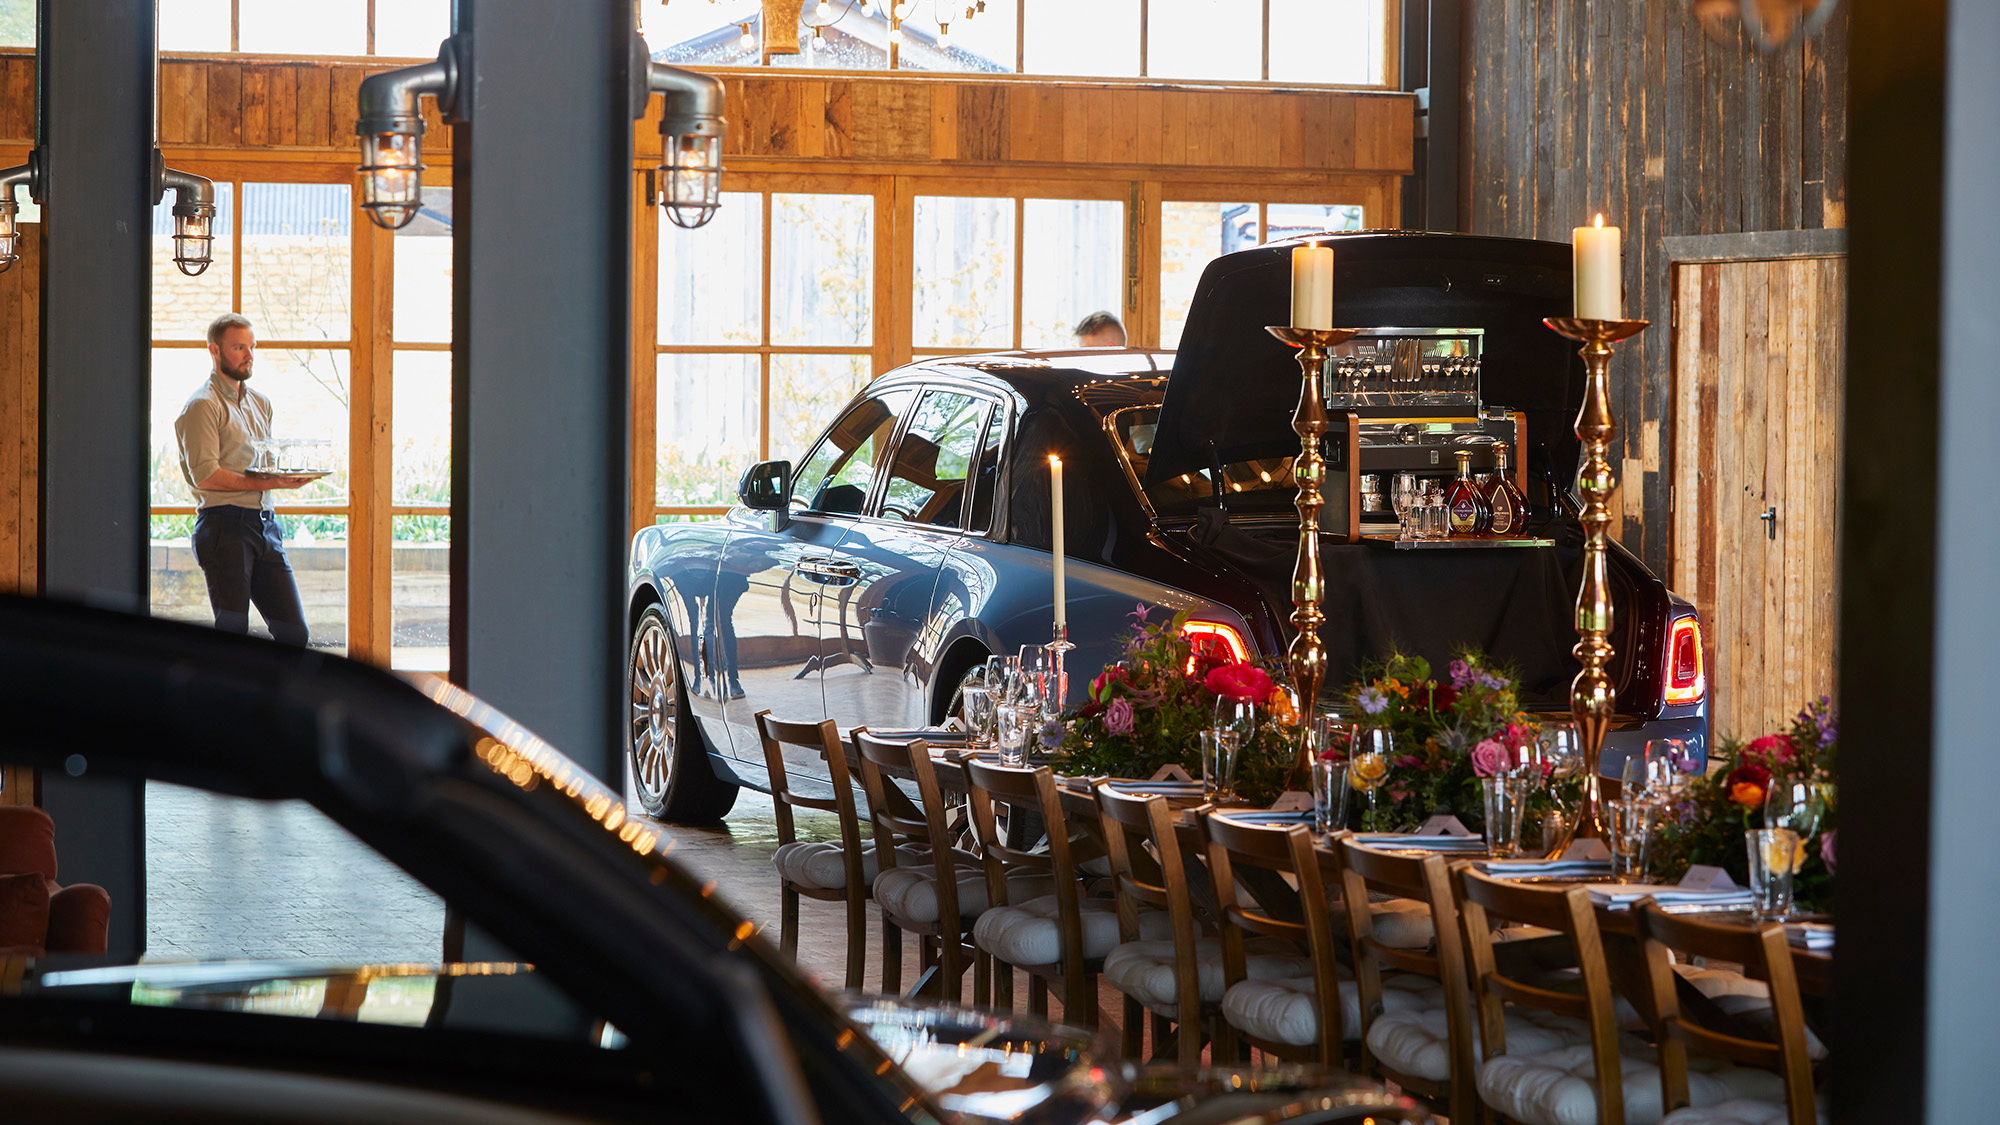 Rolls-Royce creates a Cars and Cognac event